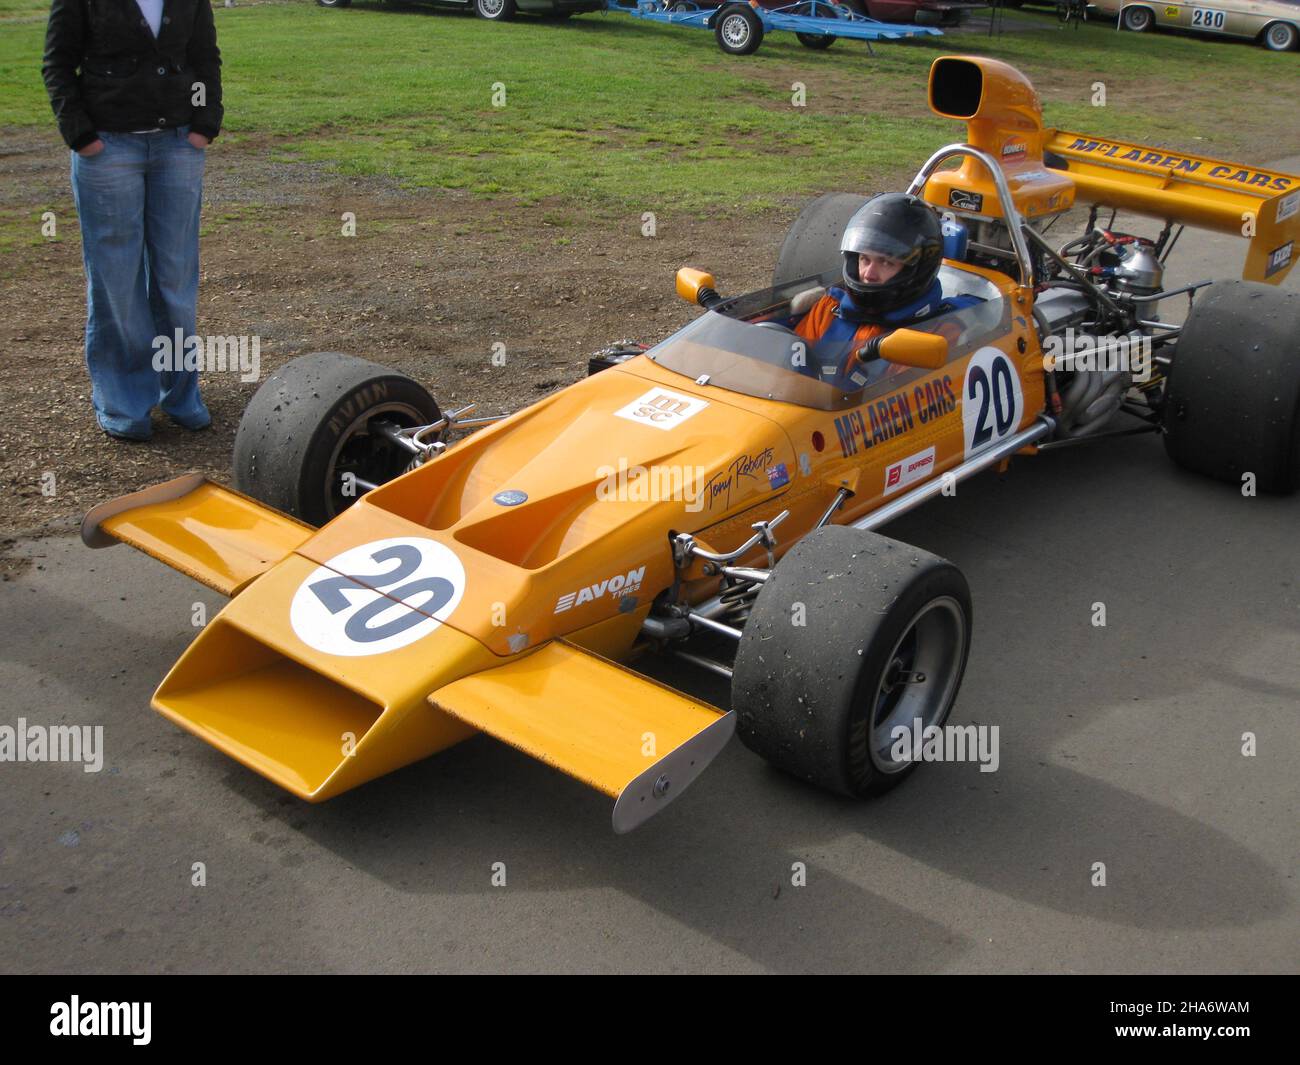 Although the name on the side of the car is 'Tony Roberts', this may be Tim Rush having a drive before buying the car, Pukekohe, 13 Sep 2009 Stock Photo